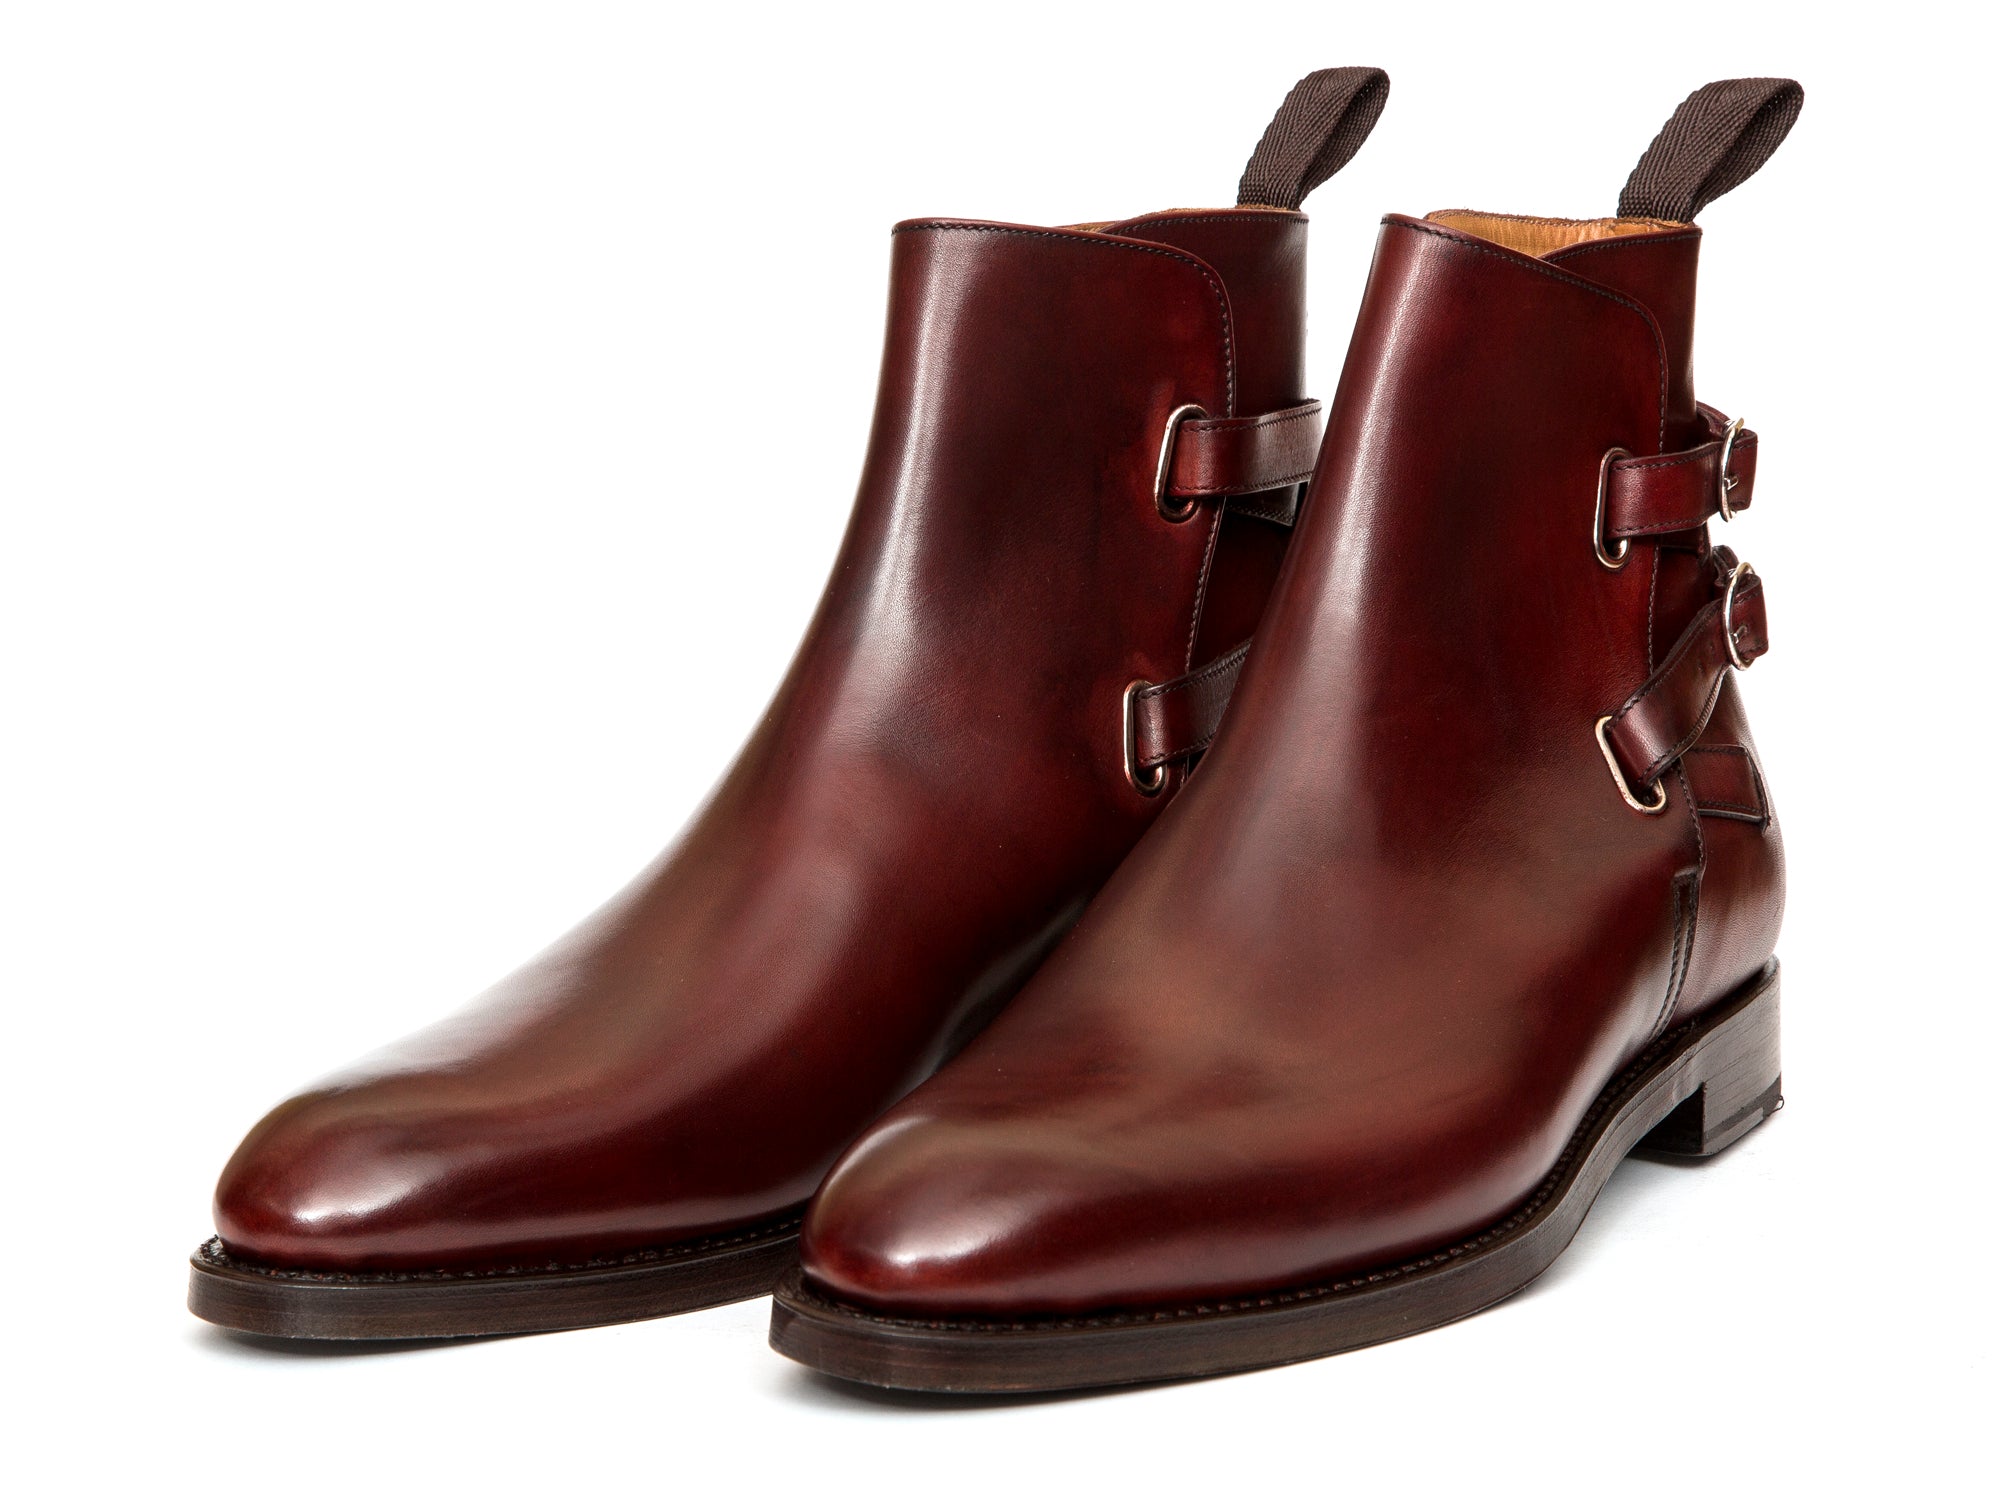 Genesee - MTO - Burgundy Calf - NGT Last - Double Country Rubber Sole